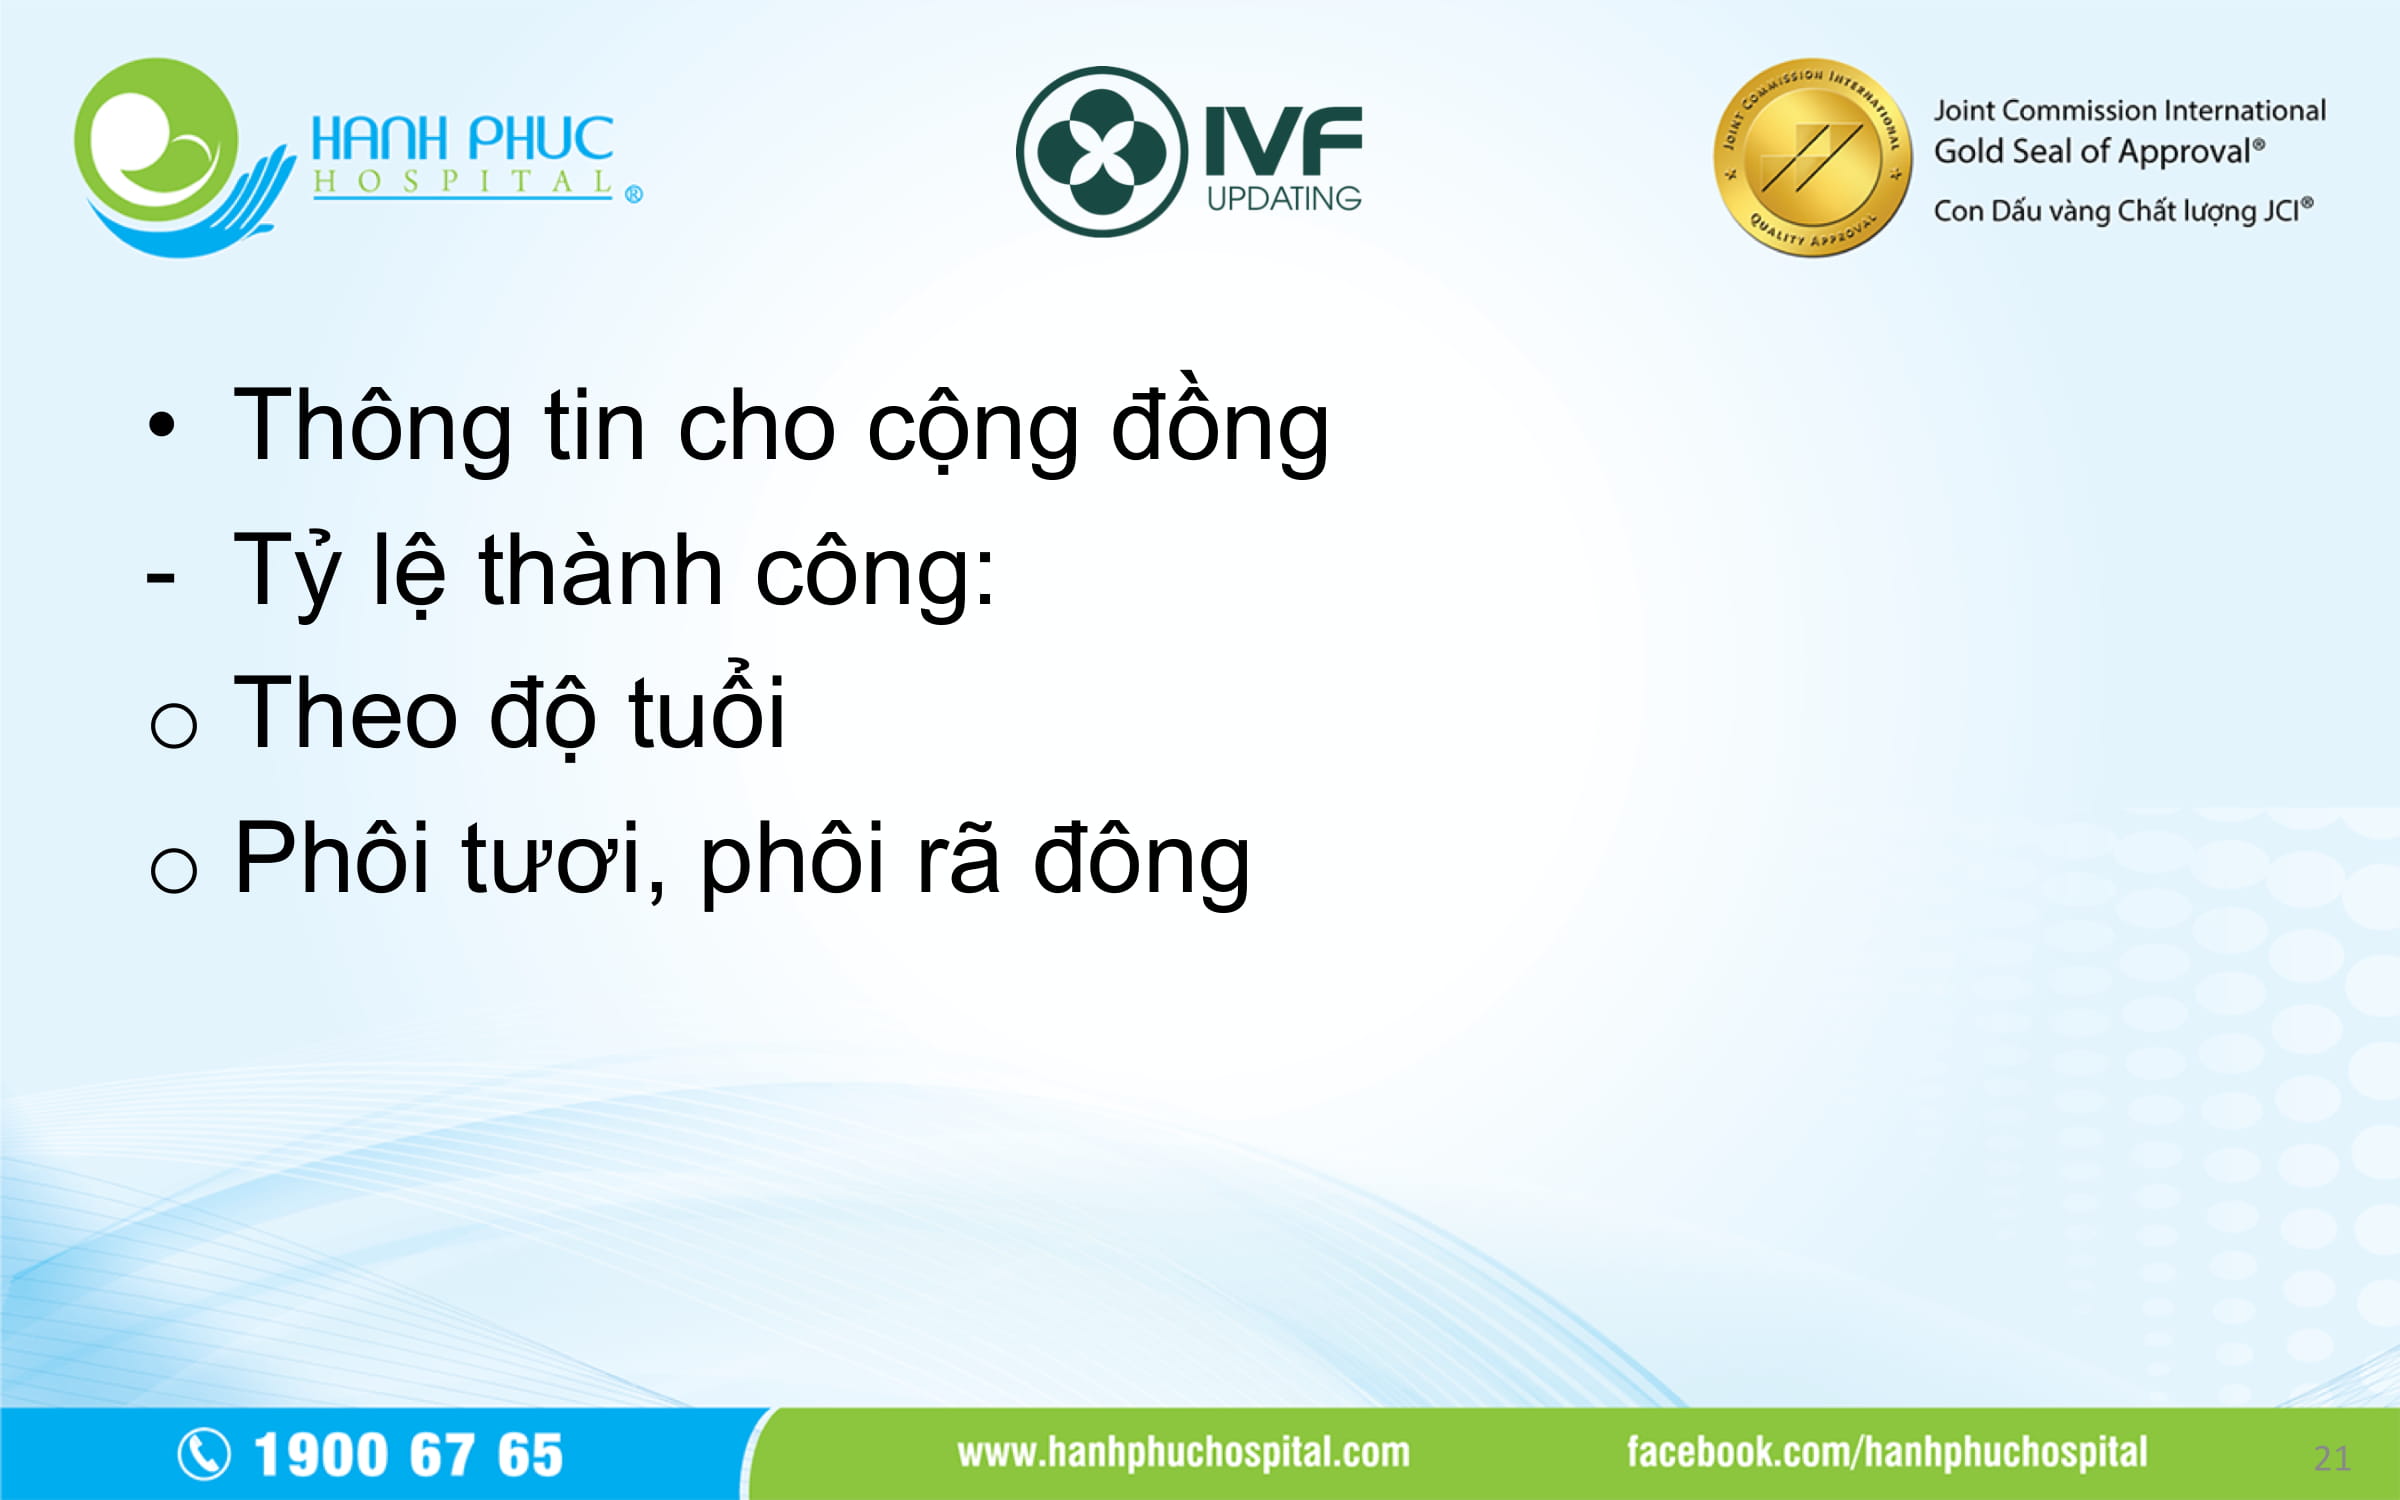 BS Vo Thien An Report_IVF UPDATING 5-21